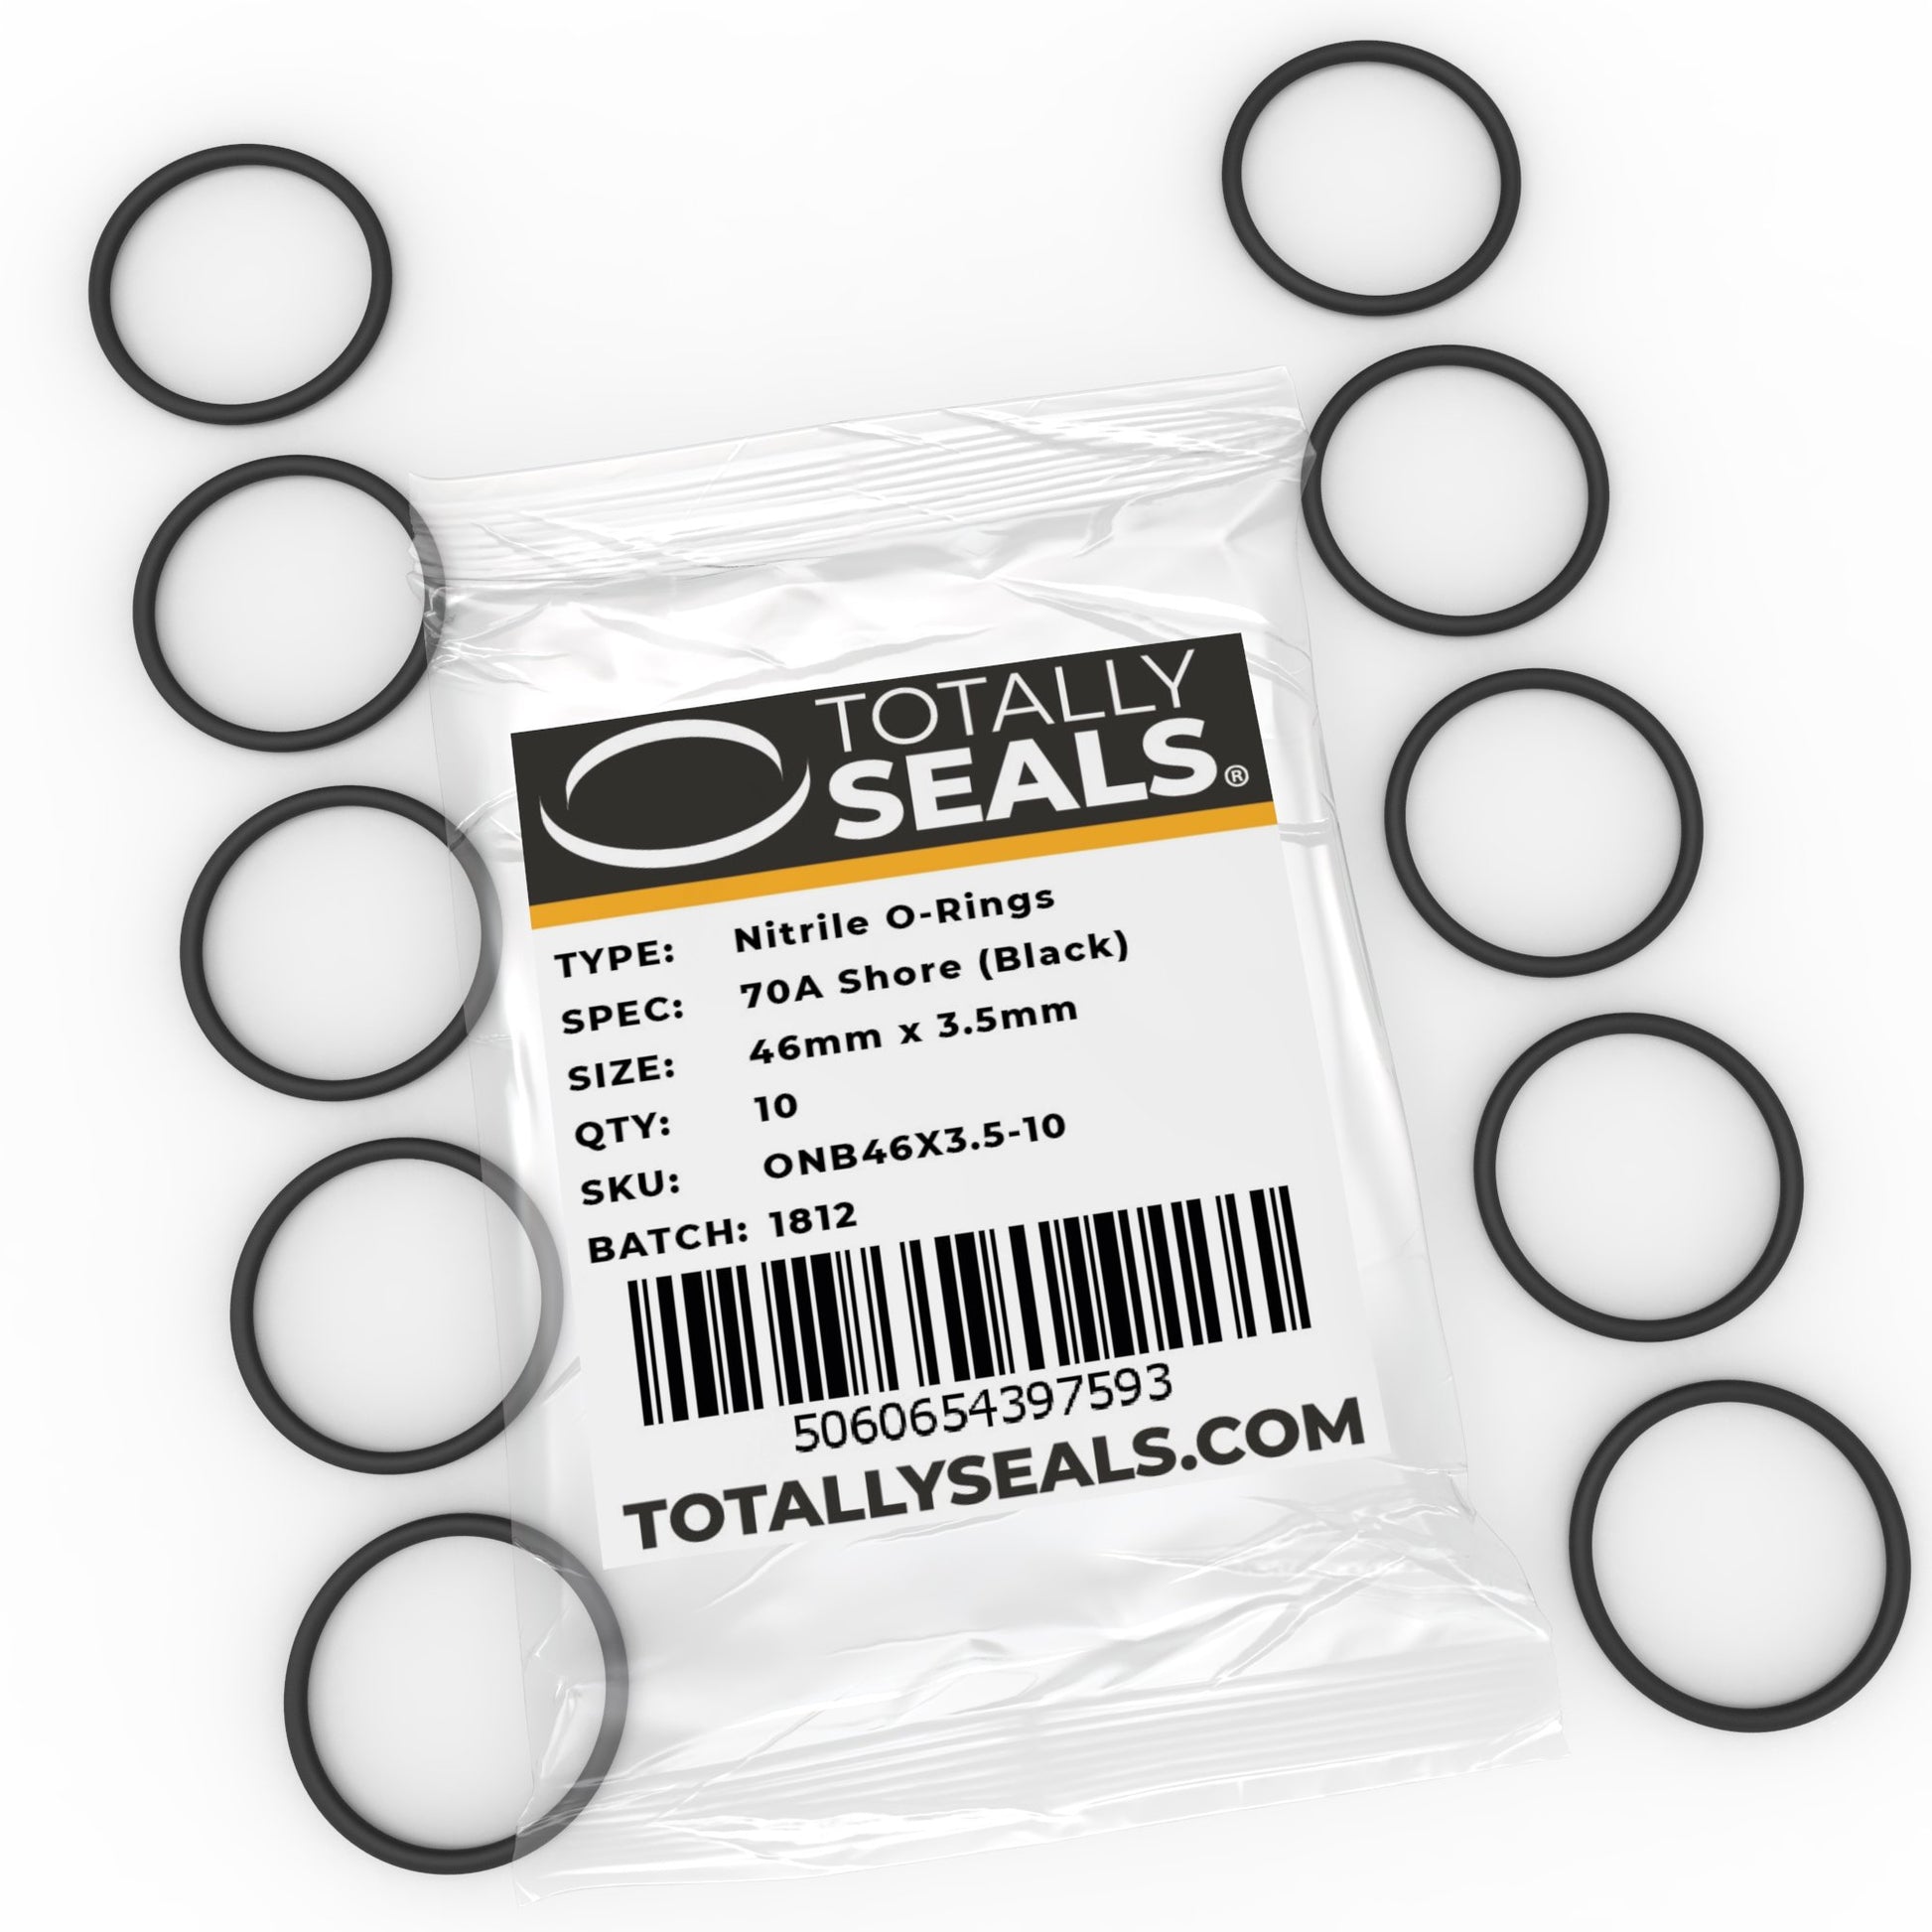 46mm x 3.5mm (53mm OD) Nitrile O-Rings - Totally Seals®